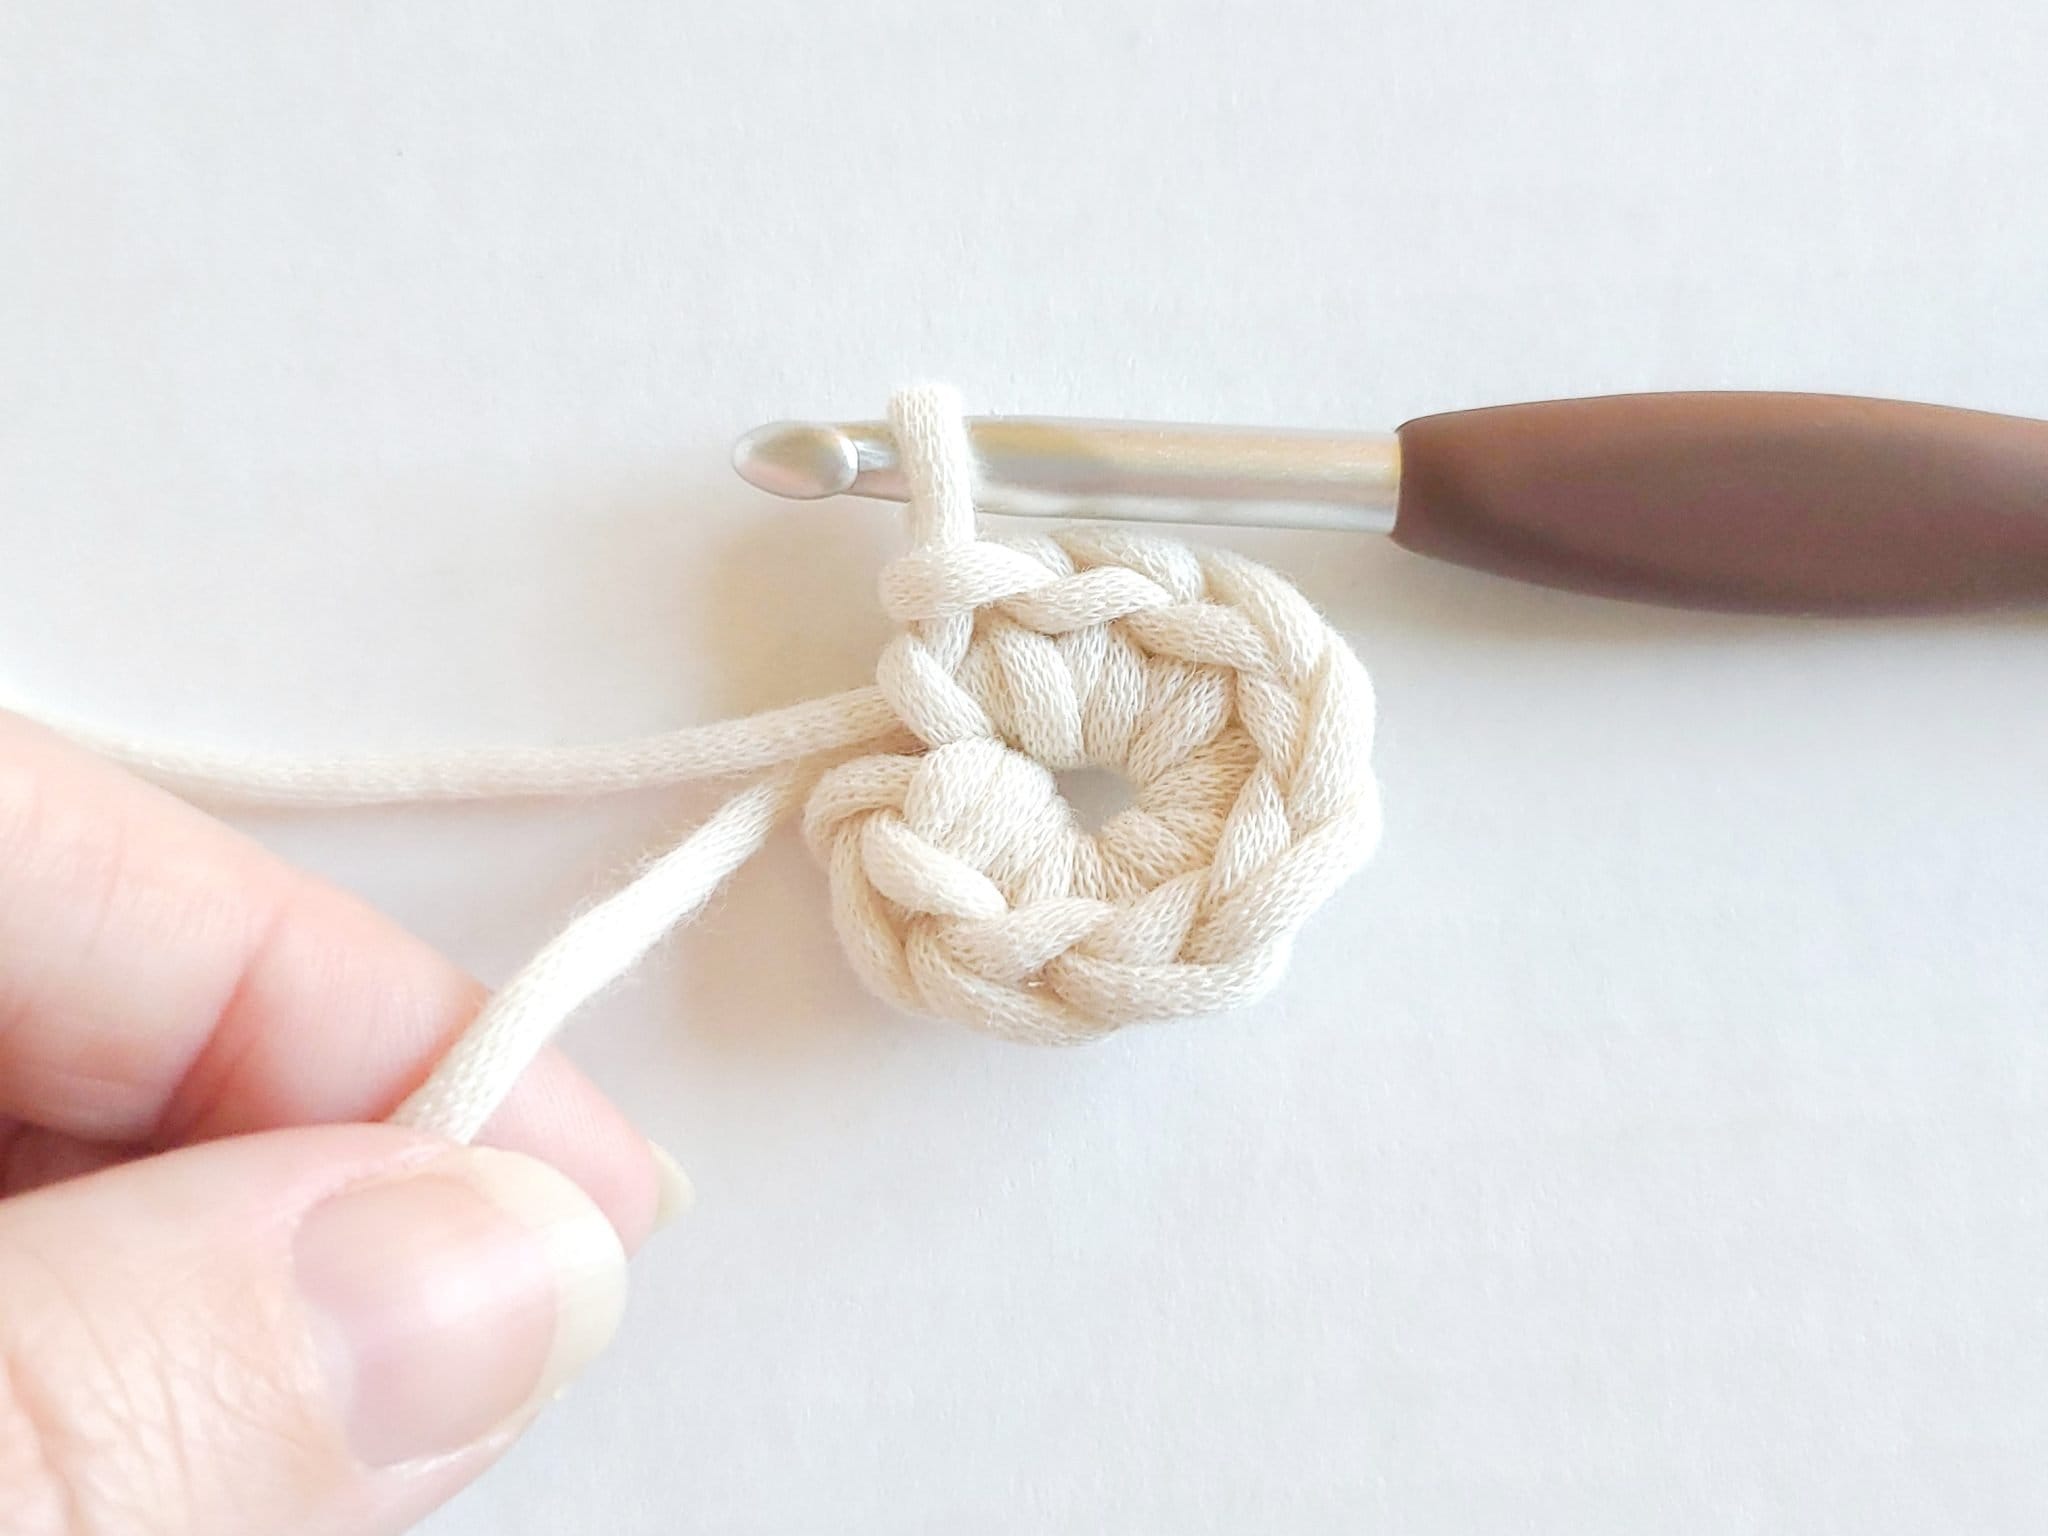 Photo Tutorial - Crochet Beginner Guide: How To Use a Yarn Ball